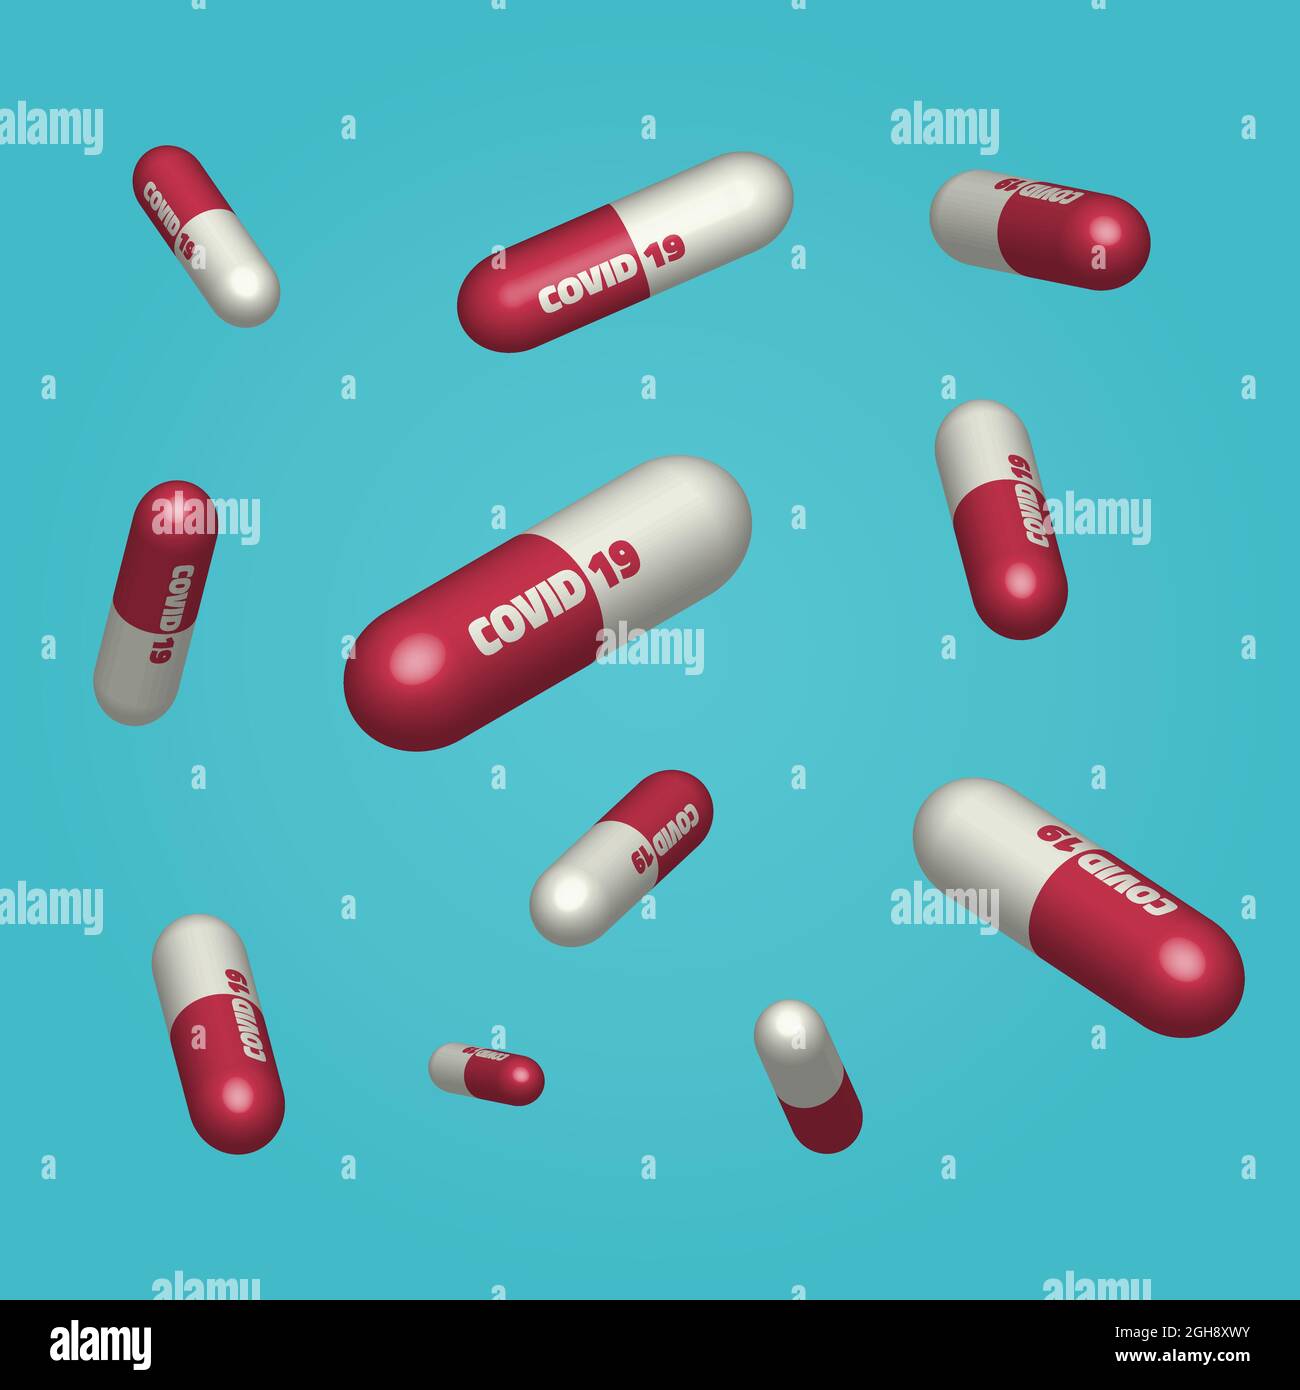 Red and white pill capsule with Covid 19 on it. Virus Outbreak Protection medical concept, Coronavirus COVID-19 Stock Vector